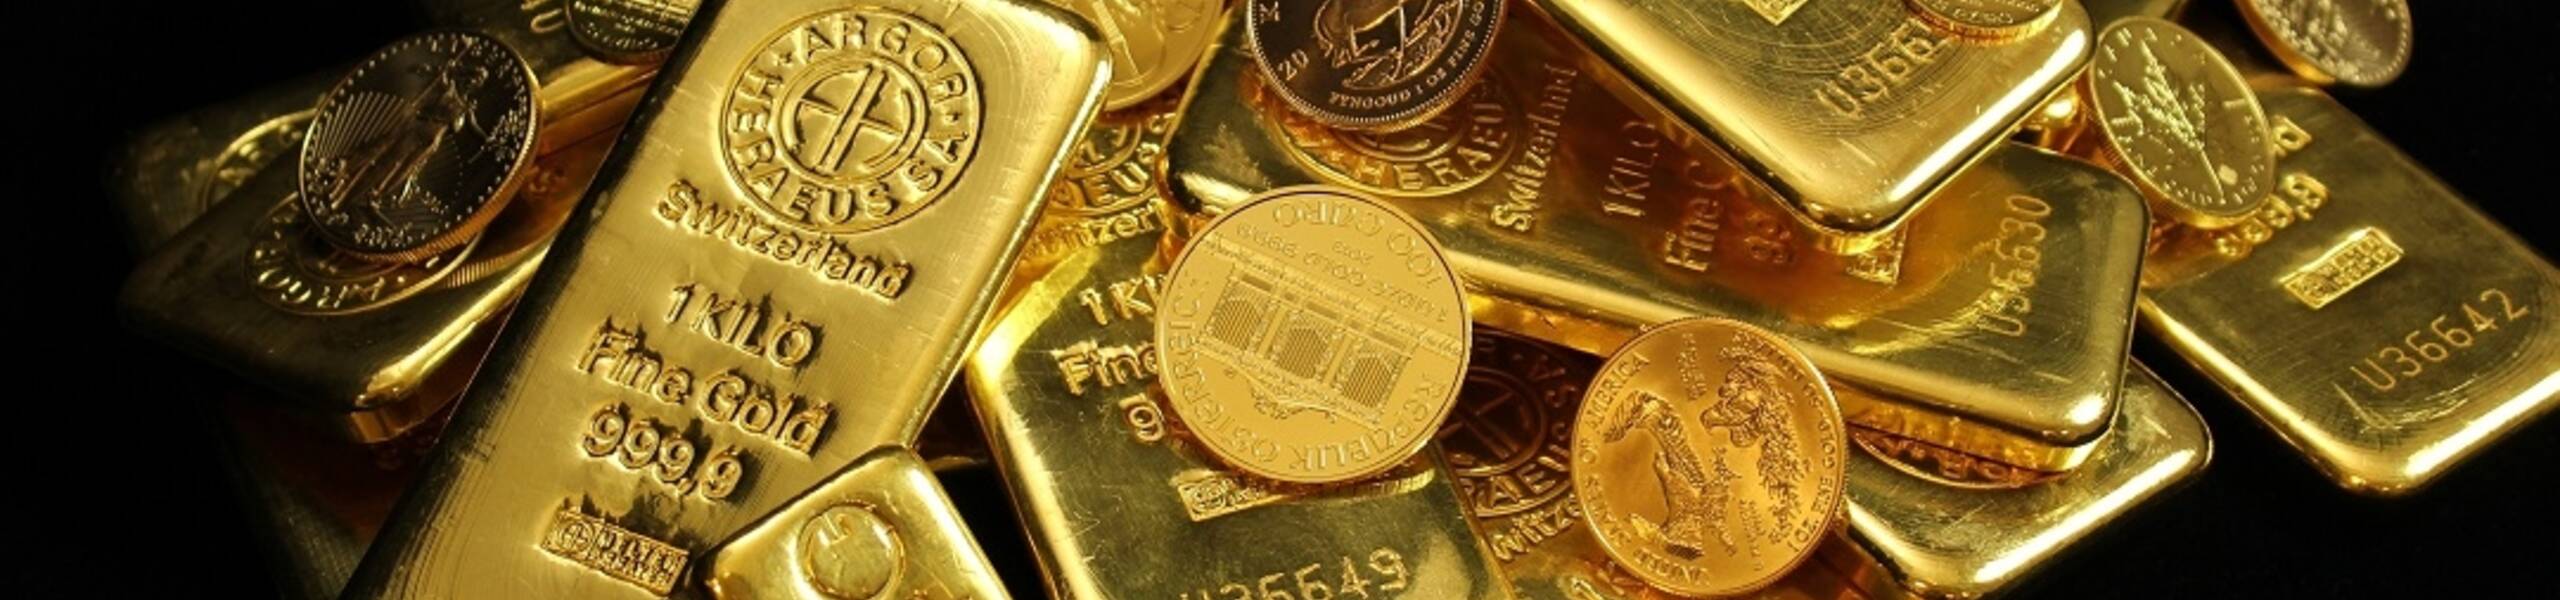 What To Expect from Gold In the upcoming week